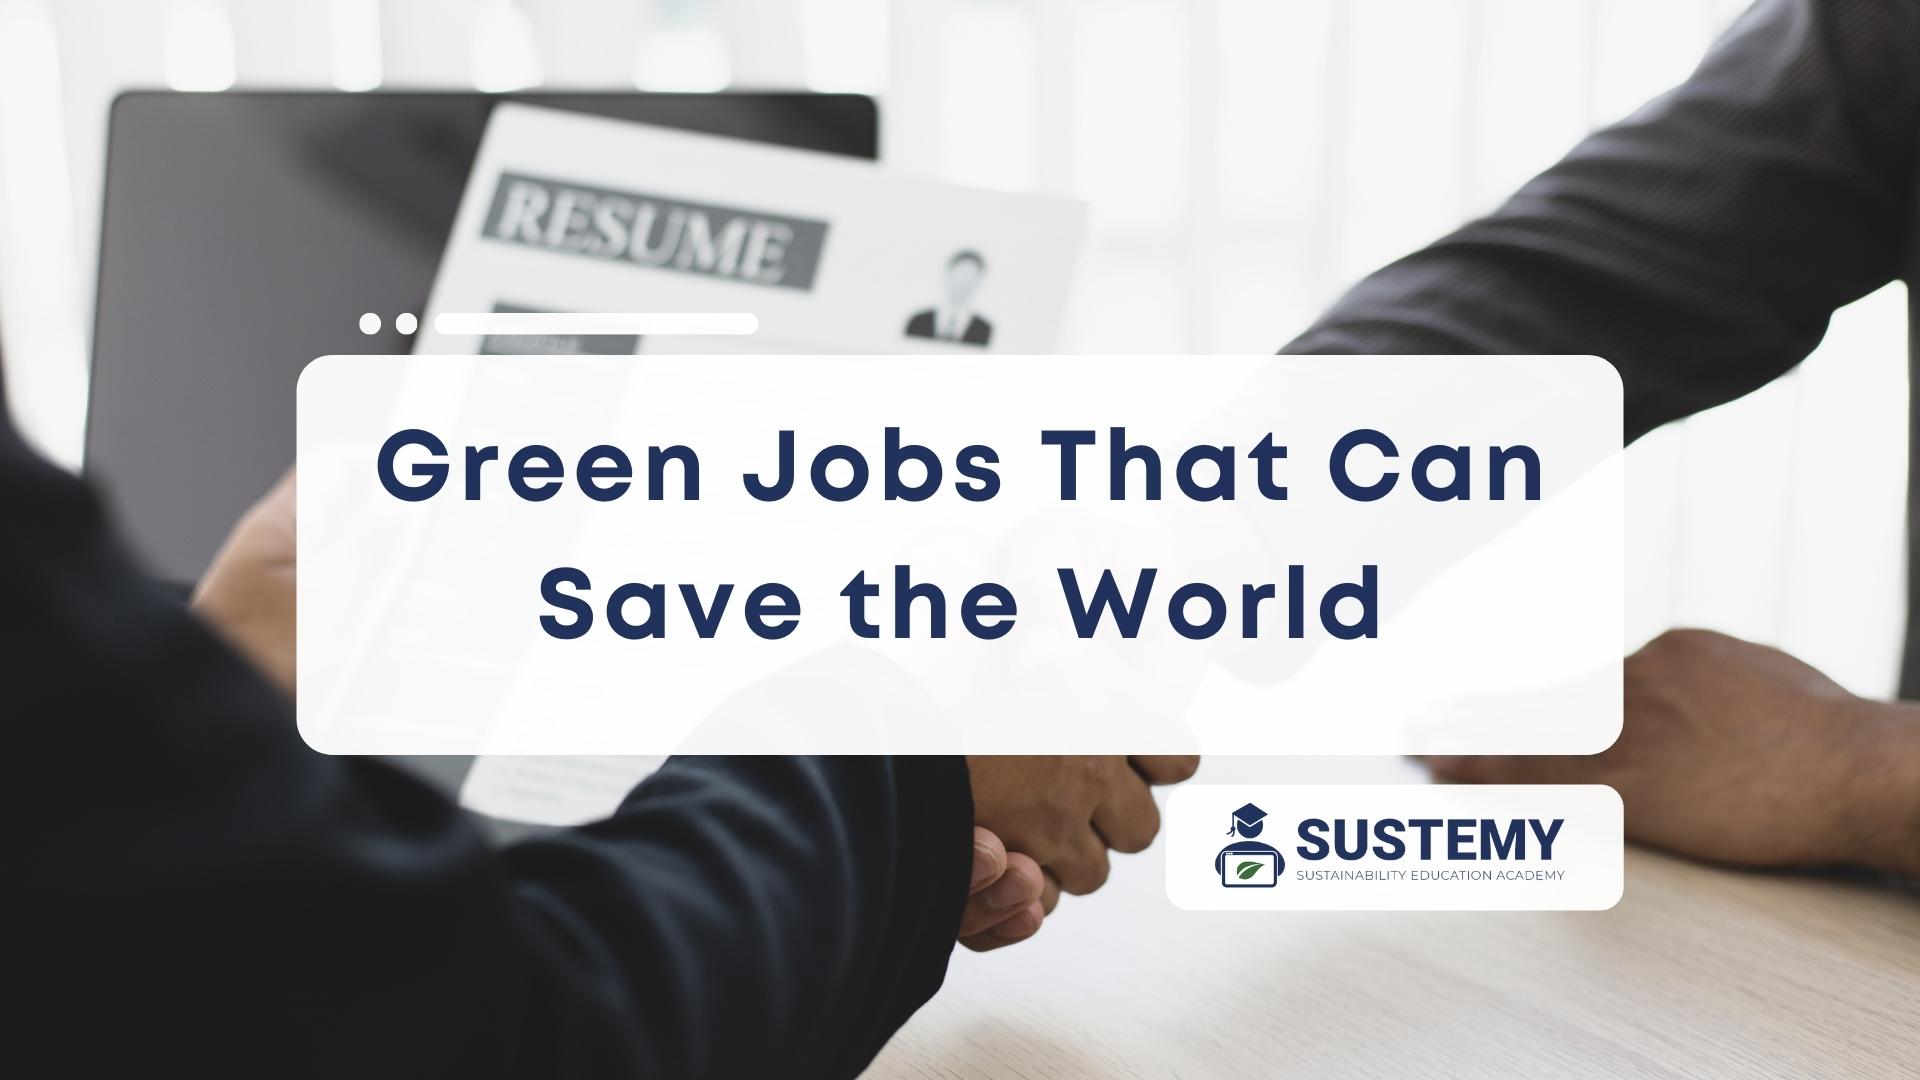 Featured image of green jobs that can save the world